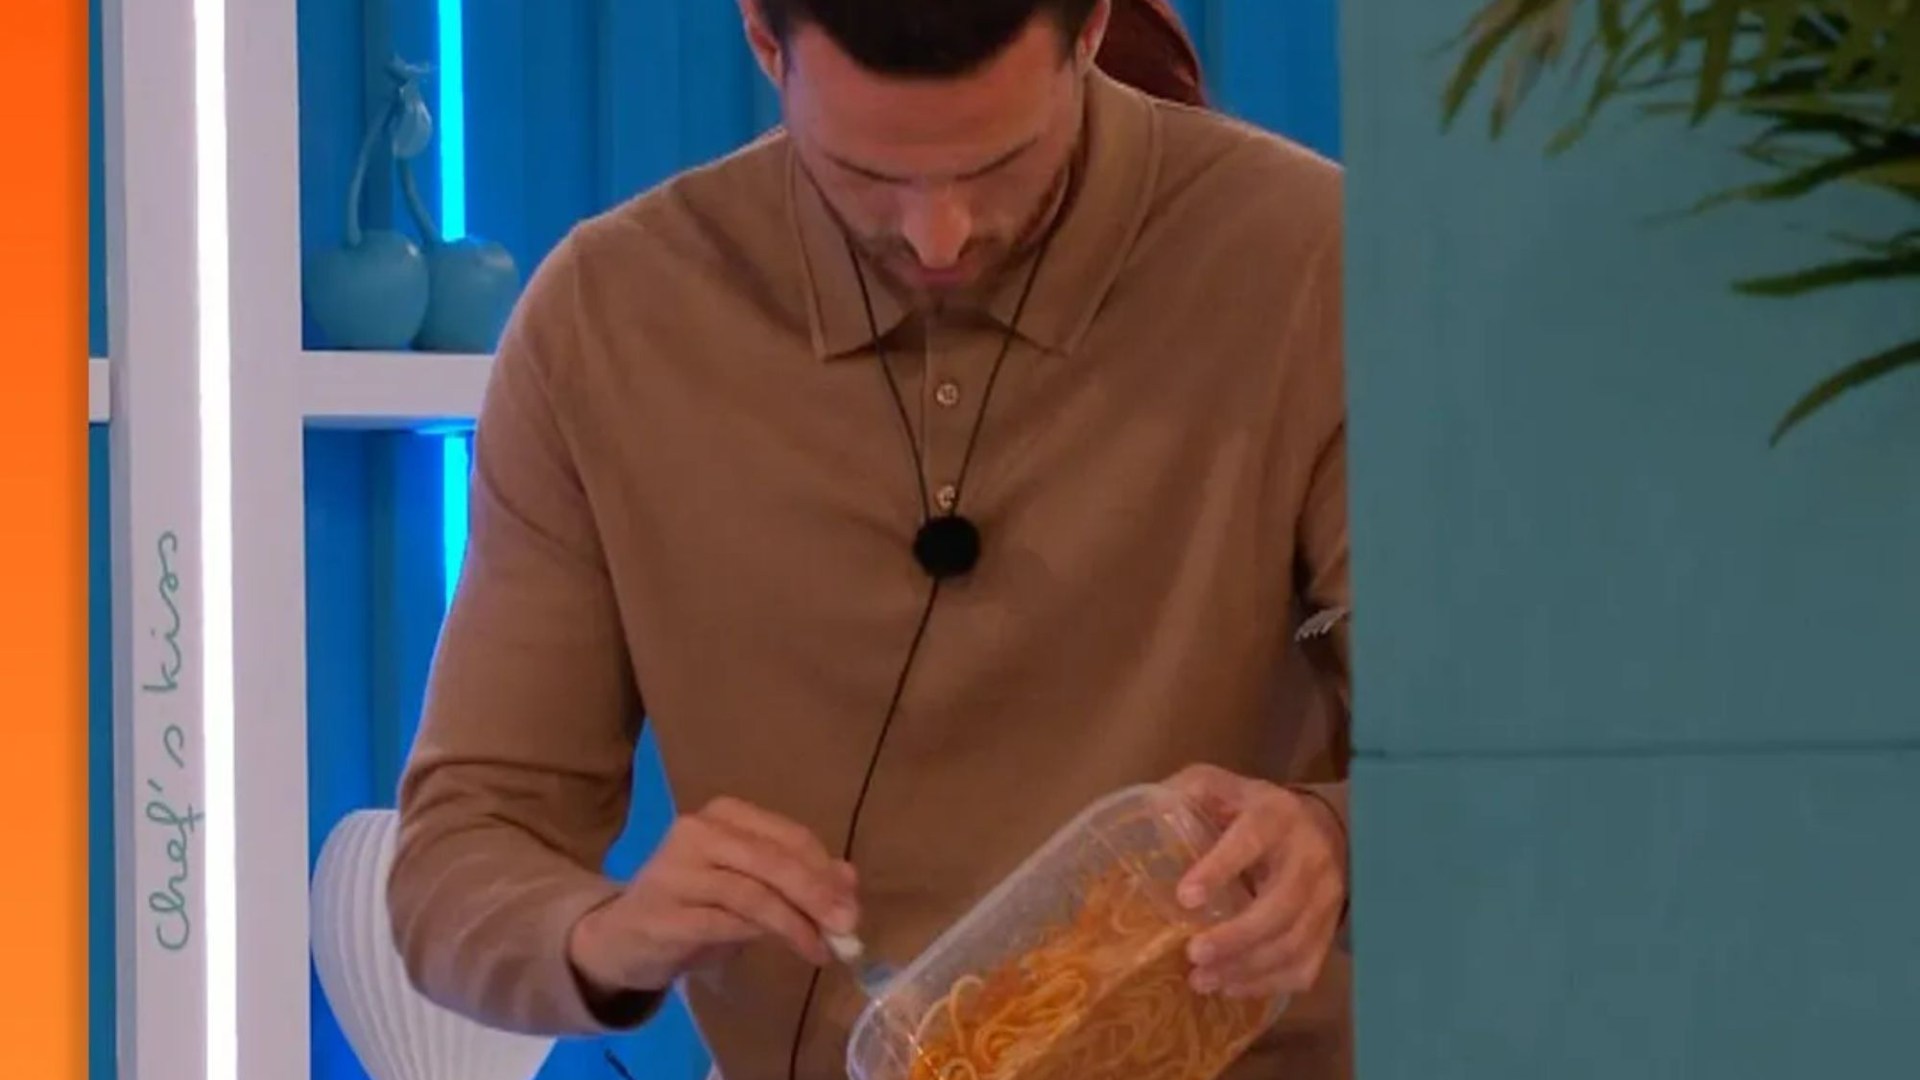 Straight to prison say sickened Love Island fans as theyspot Ronnies stomach-churning eating habit [Video]